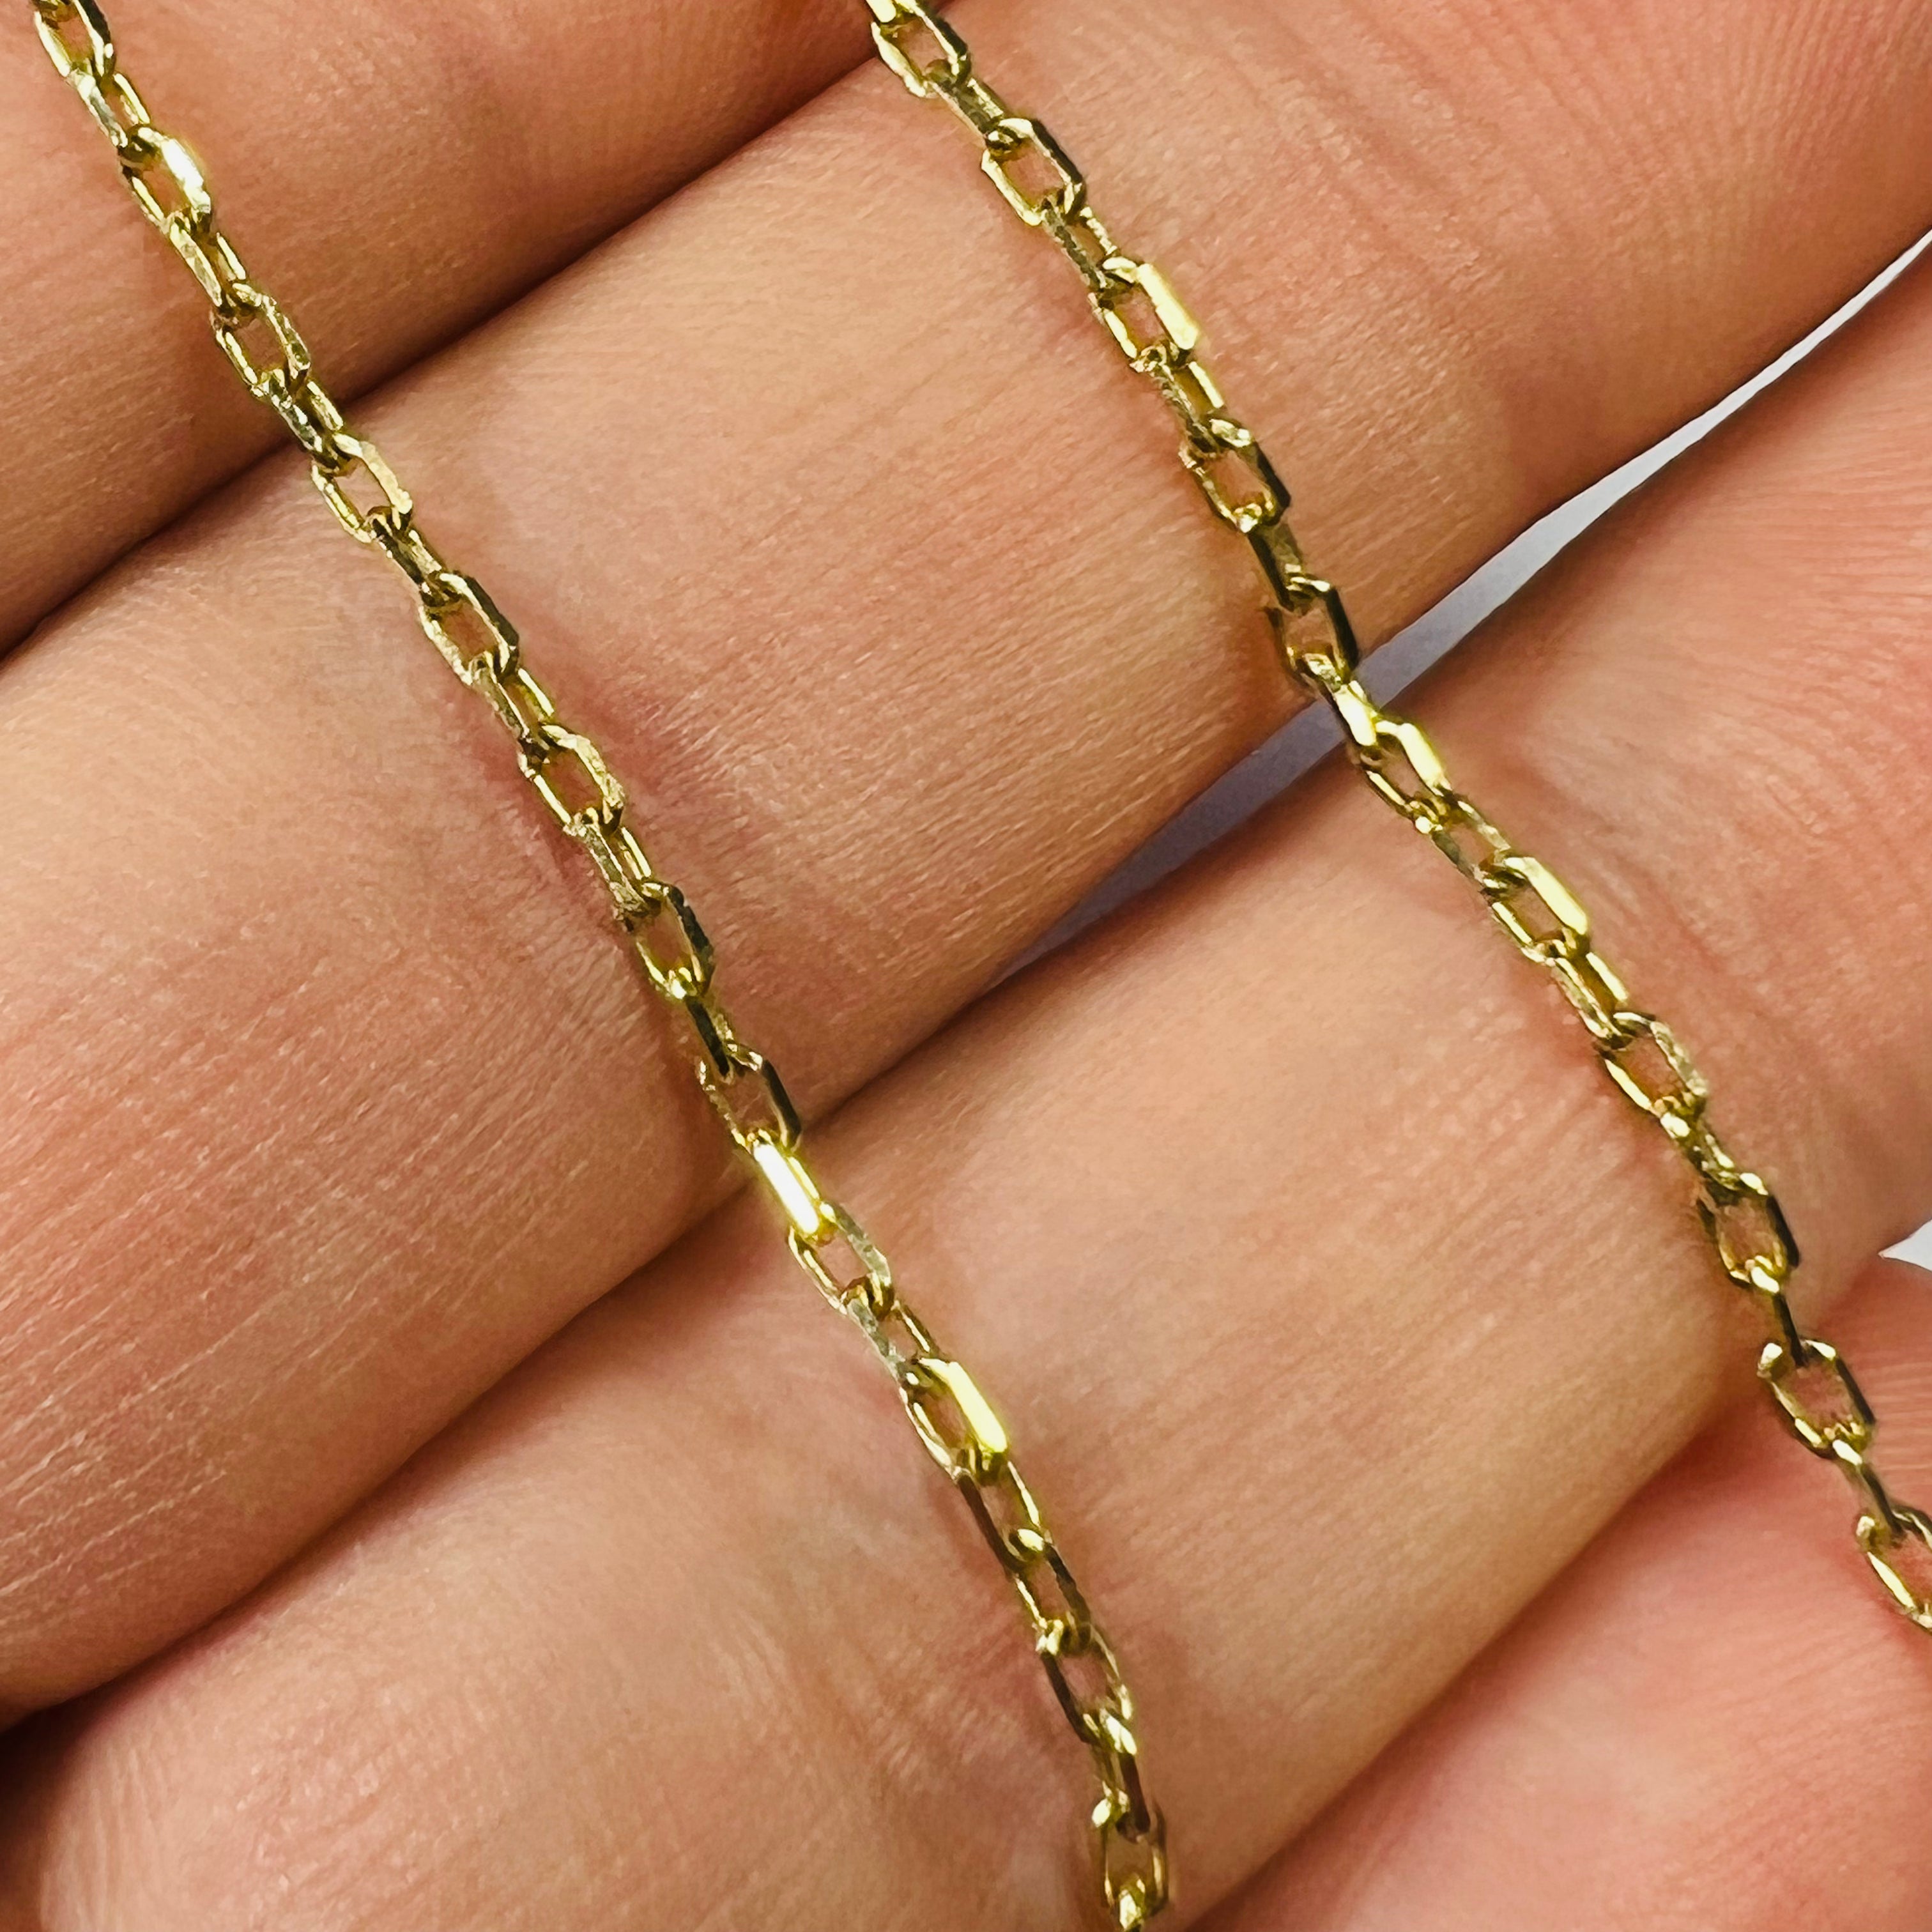 14K Yellow Gold Cable Chain Anklet 9.25" 1.6g